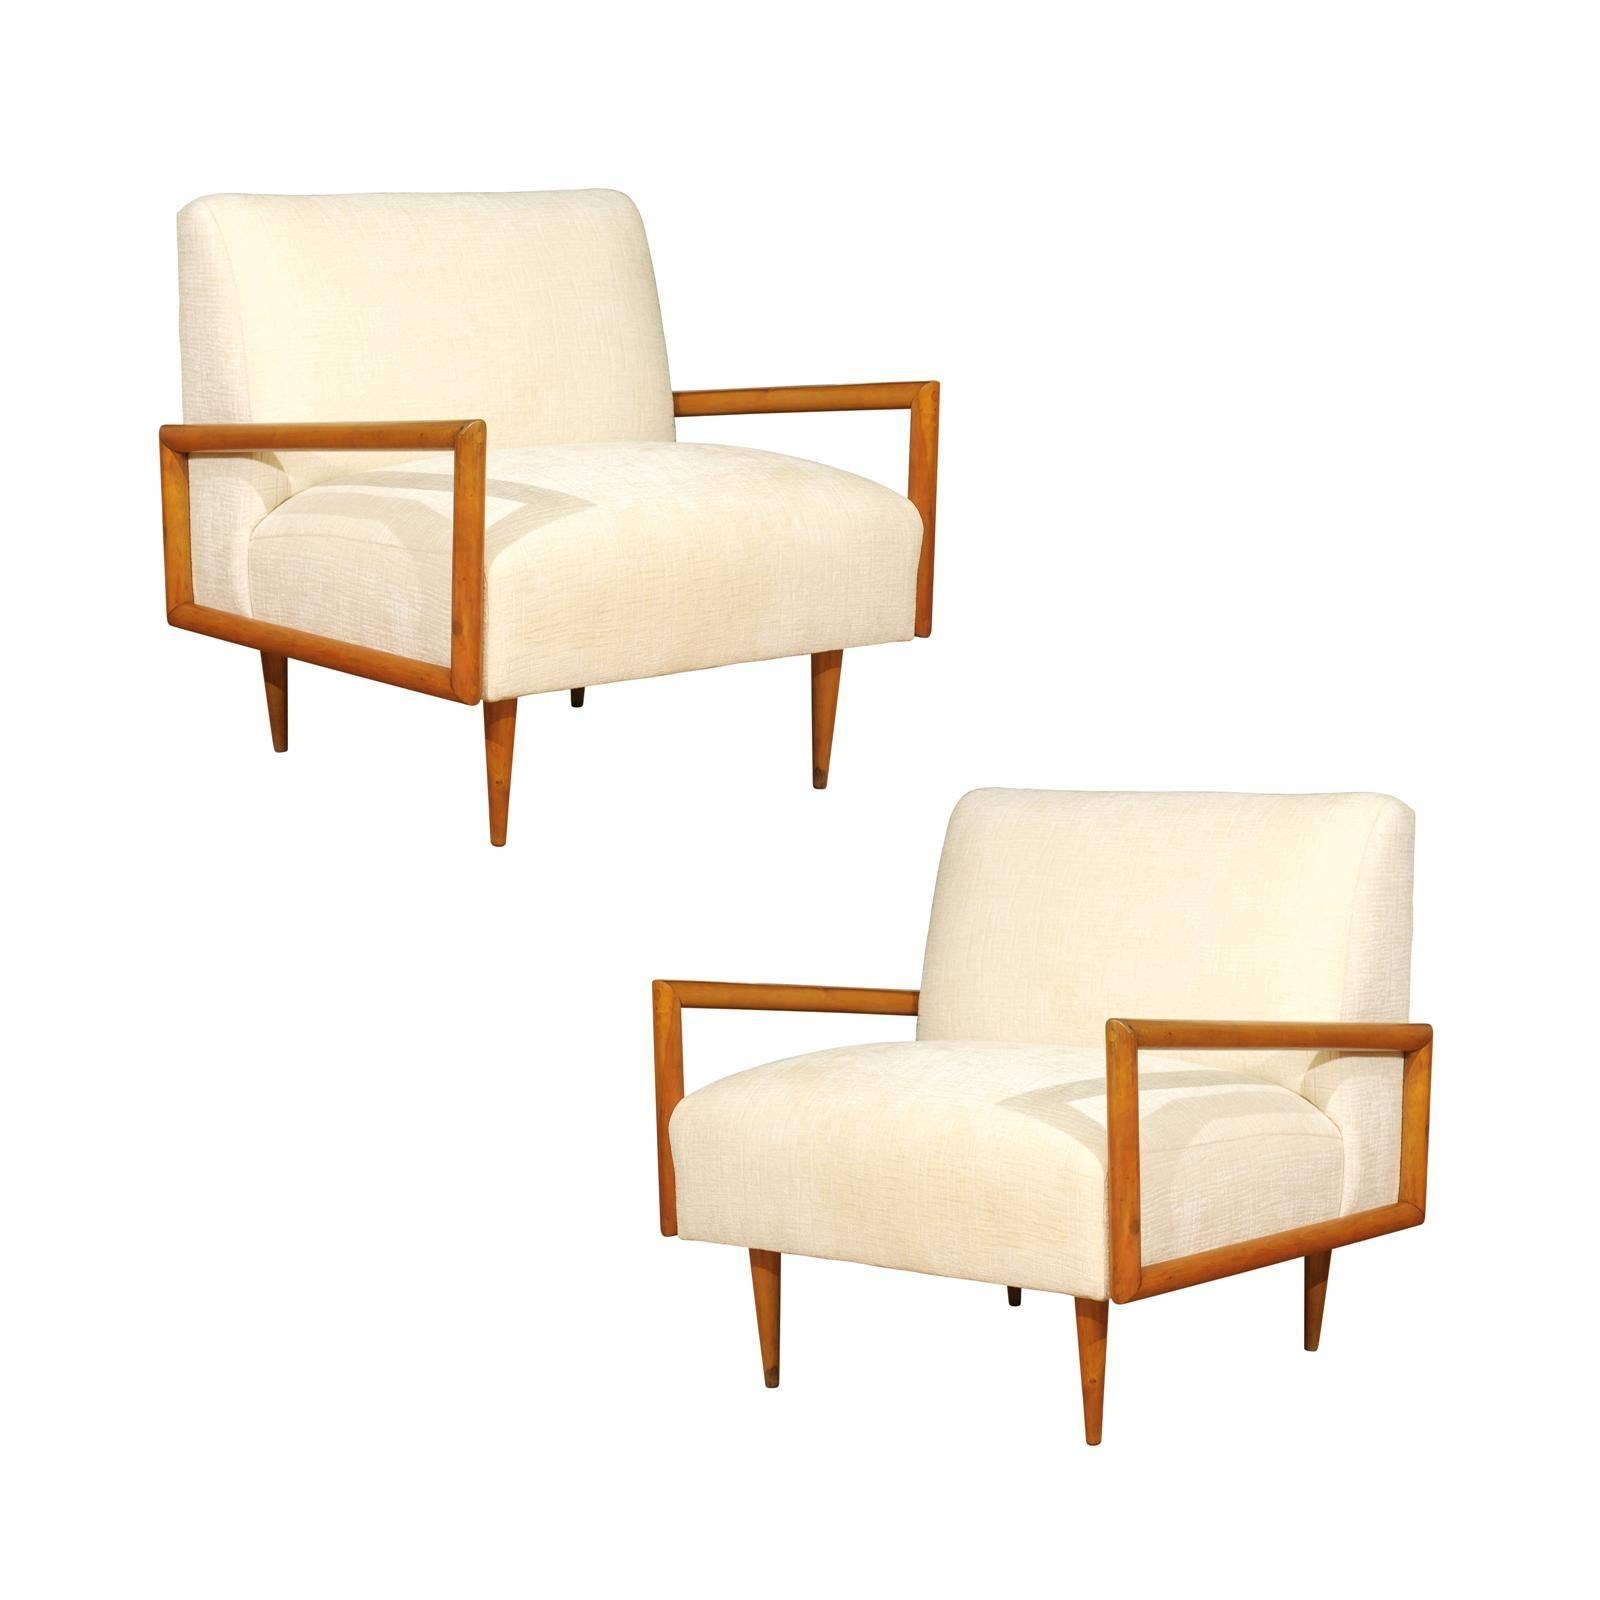 Restored Pair of Maple Cube Loungers in the Style of Paul McCobb